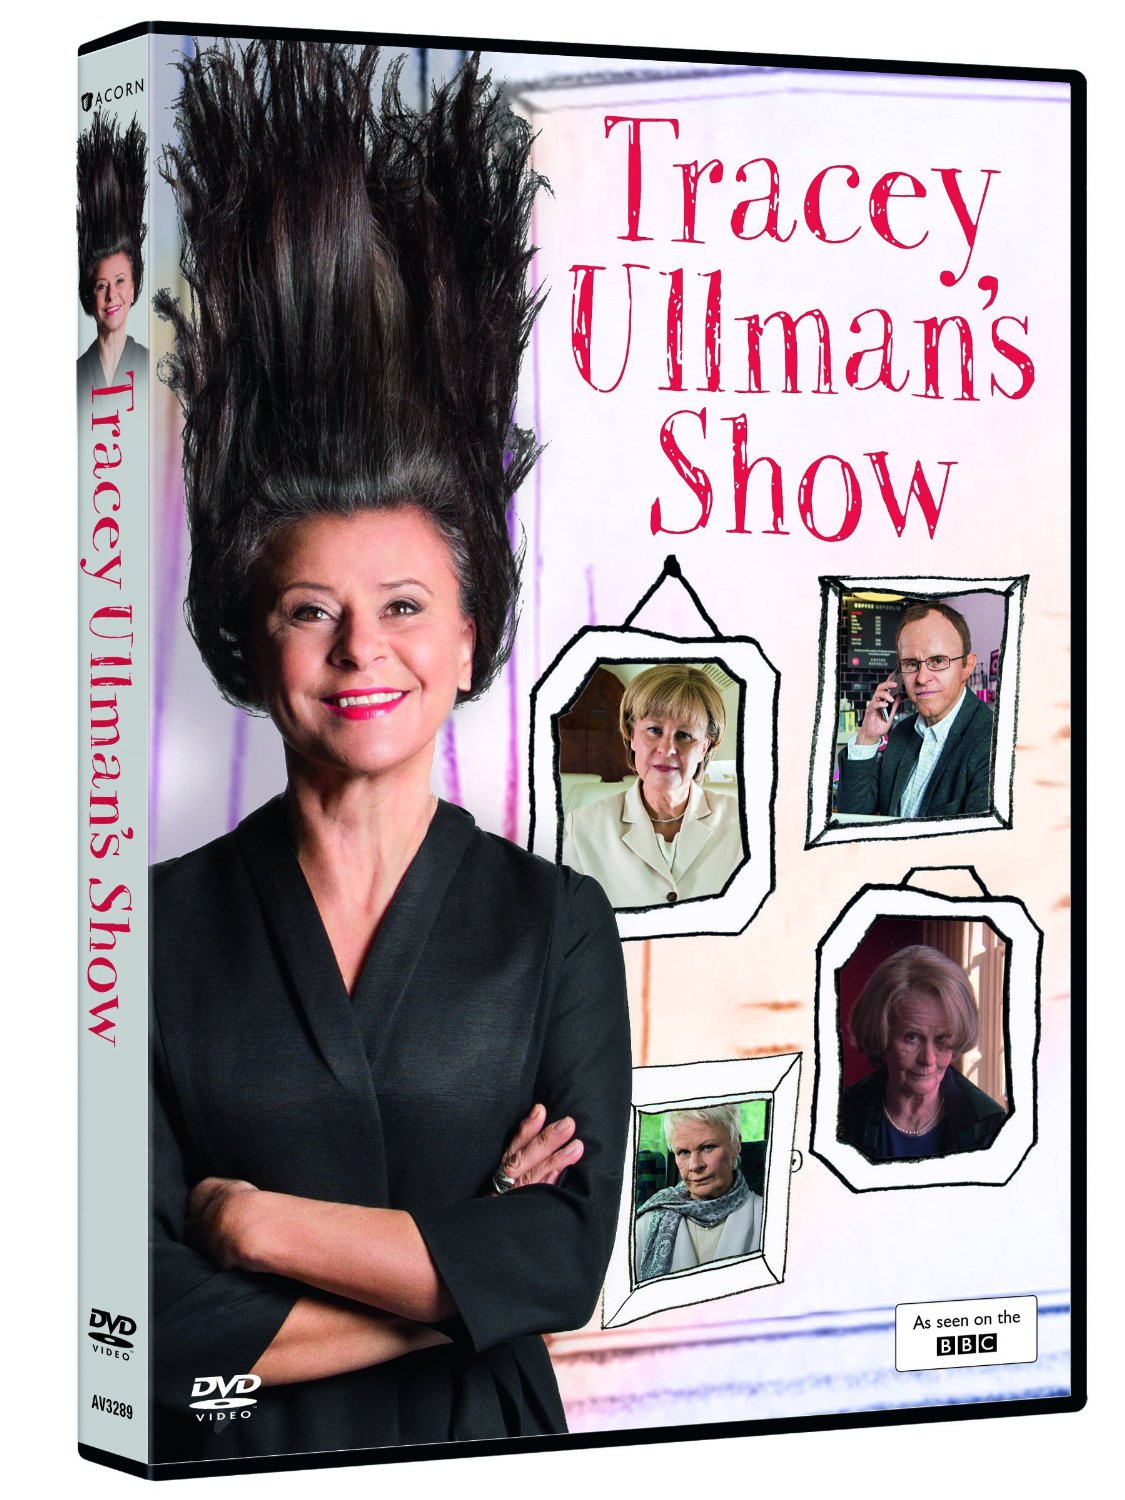 Tracey Ullman S Show Series 1 Coming To Dvd February 22 2016 All About Tracey